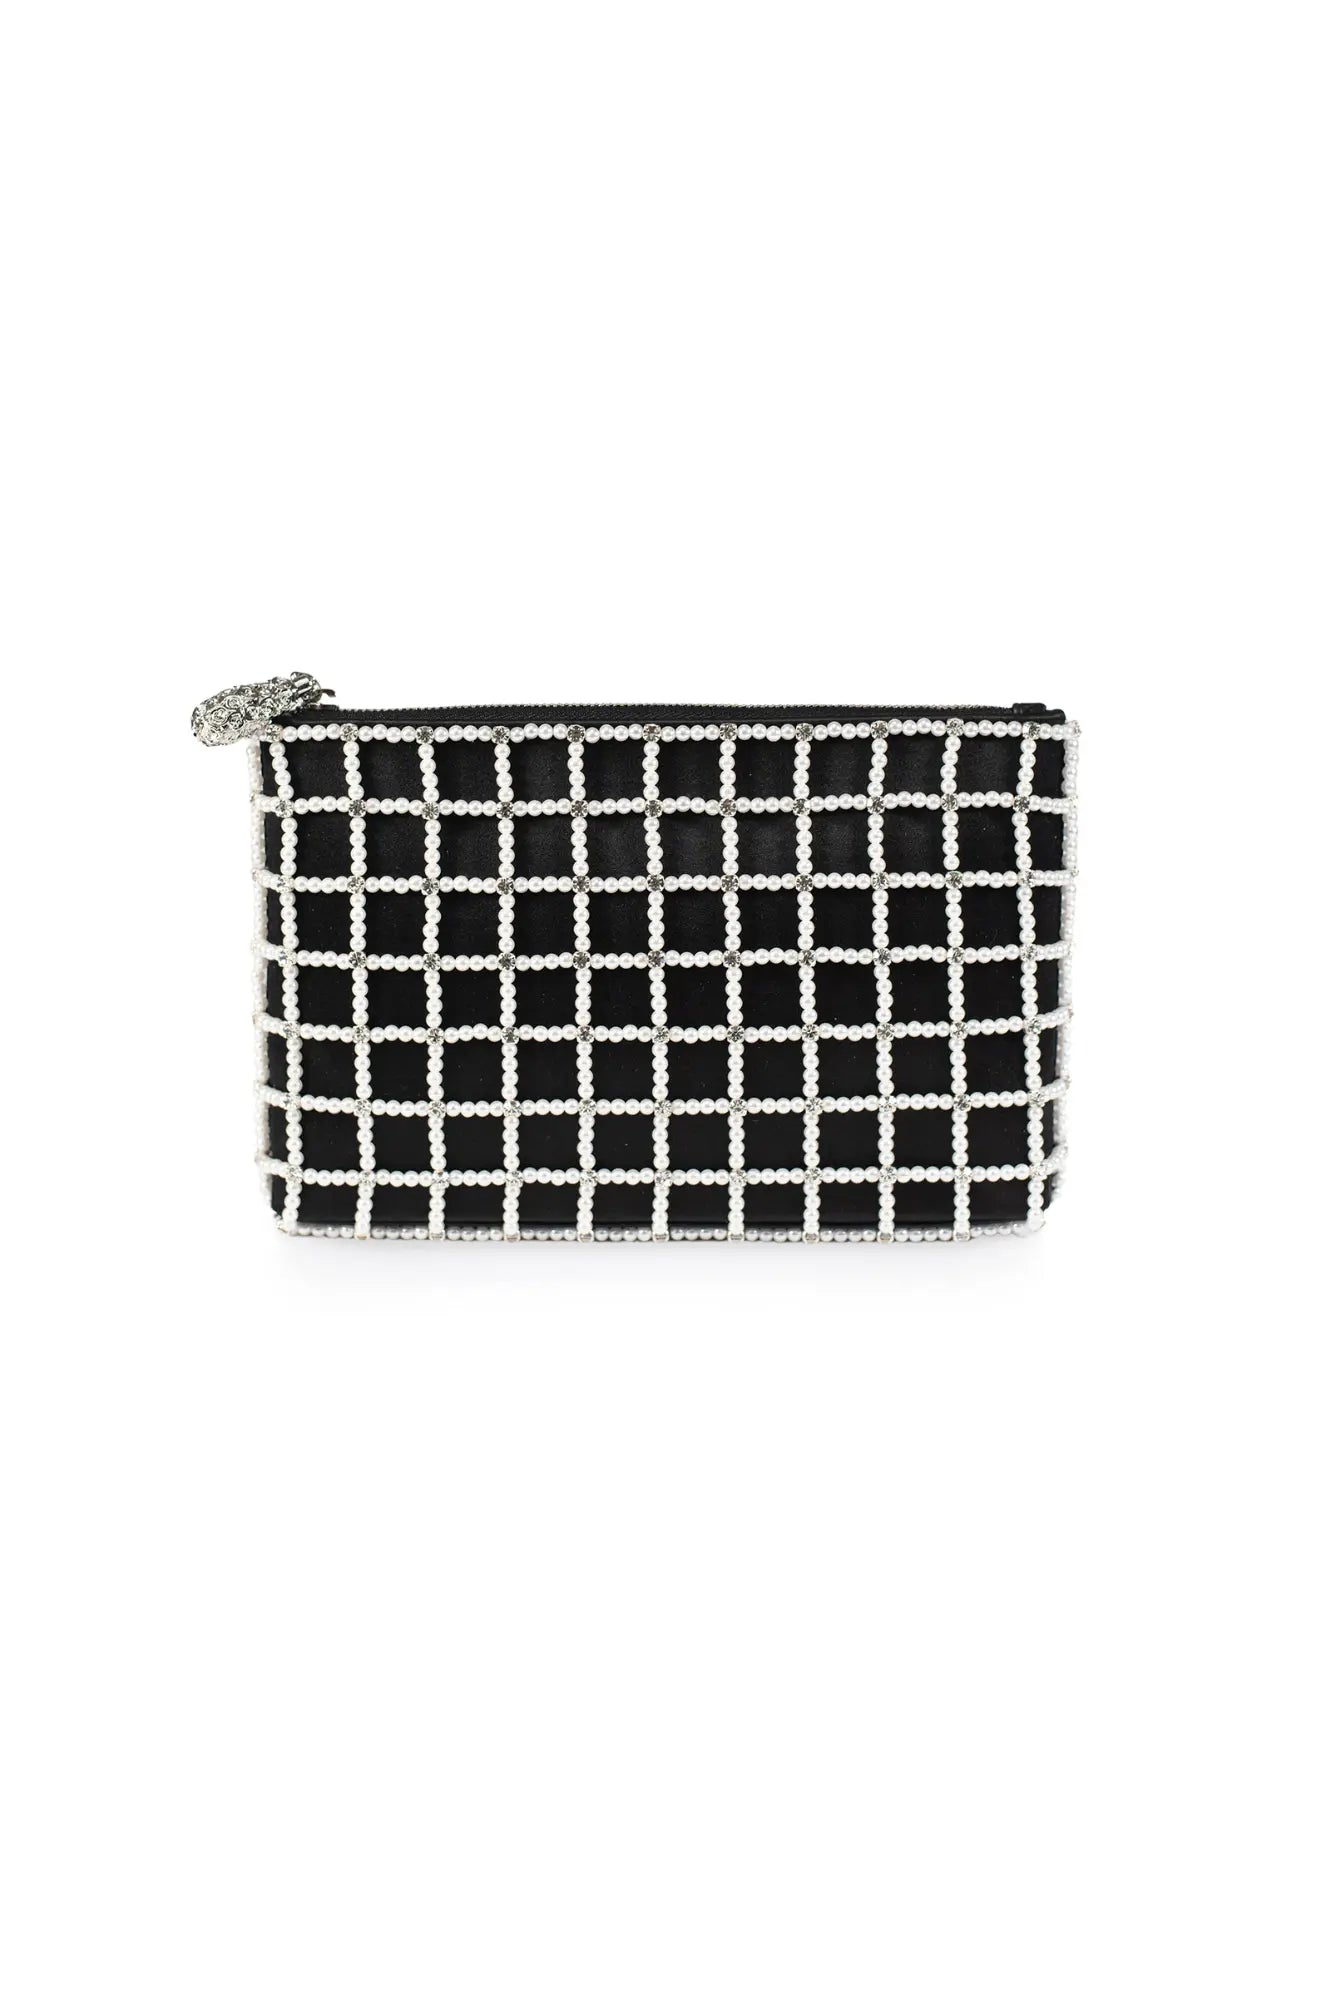 Italian Craftsmanship The Bella Rosa Collection Hayden Clutch Pearl Cage Black isolated on white background.